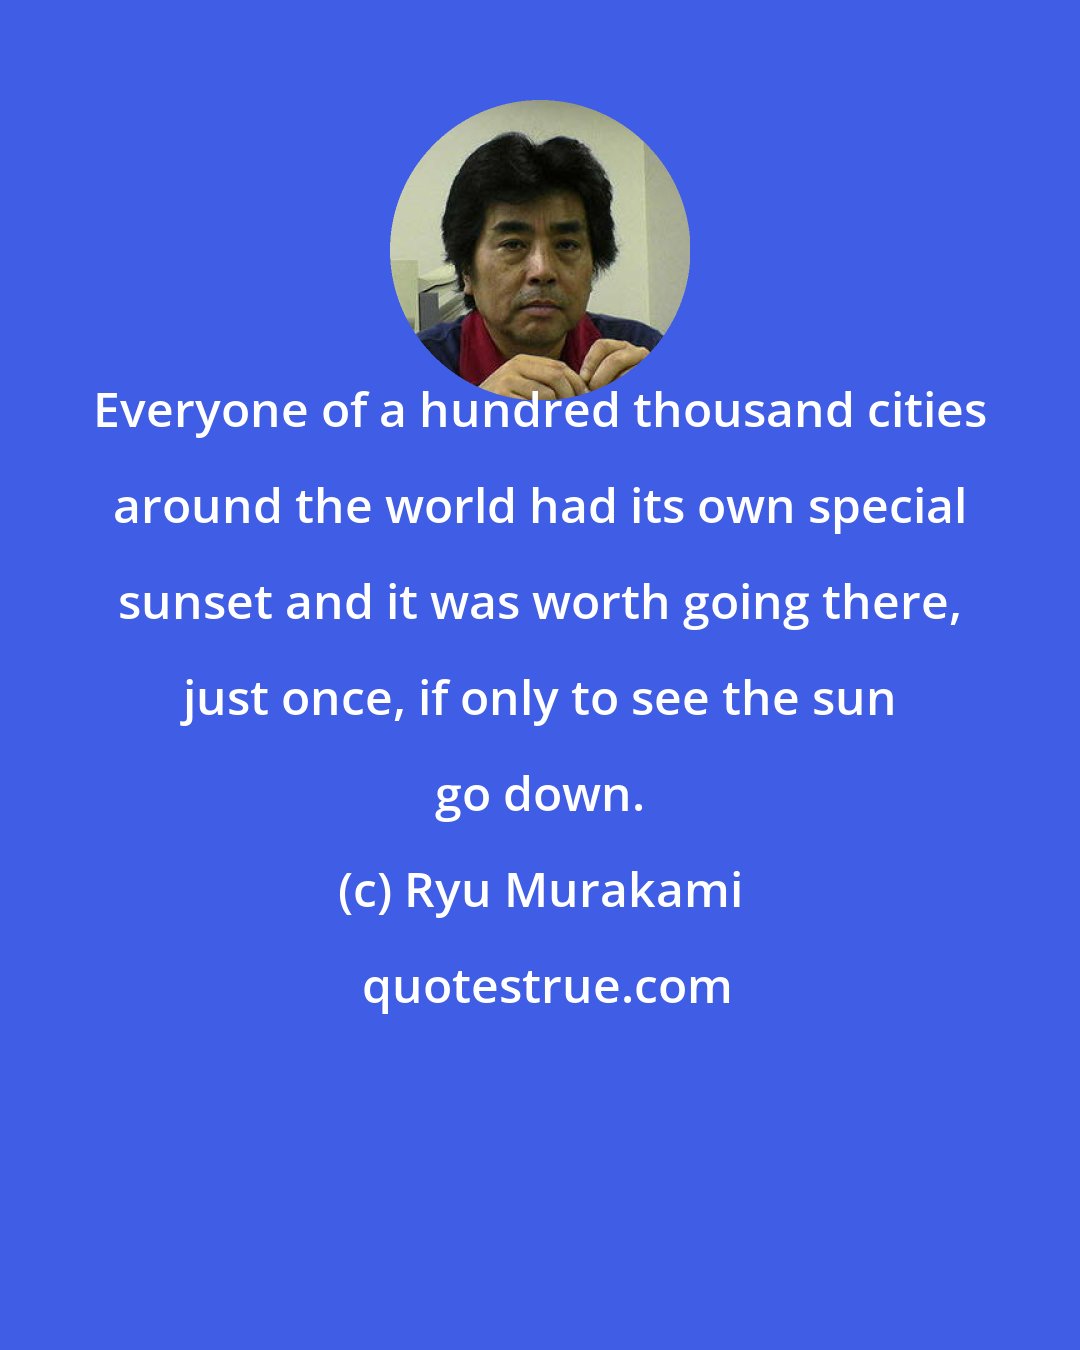 Ryu Murakami: Everyone of a hundred thousand cities around the world had its own special sunset and it was worth going there, just once, if only to see the sun go down.